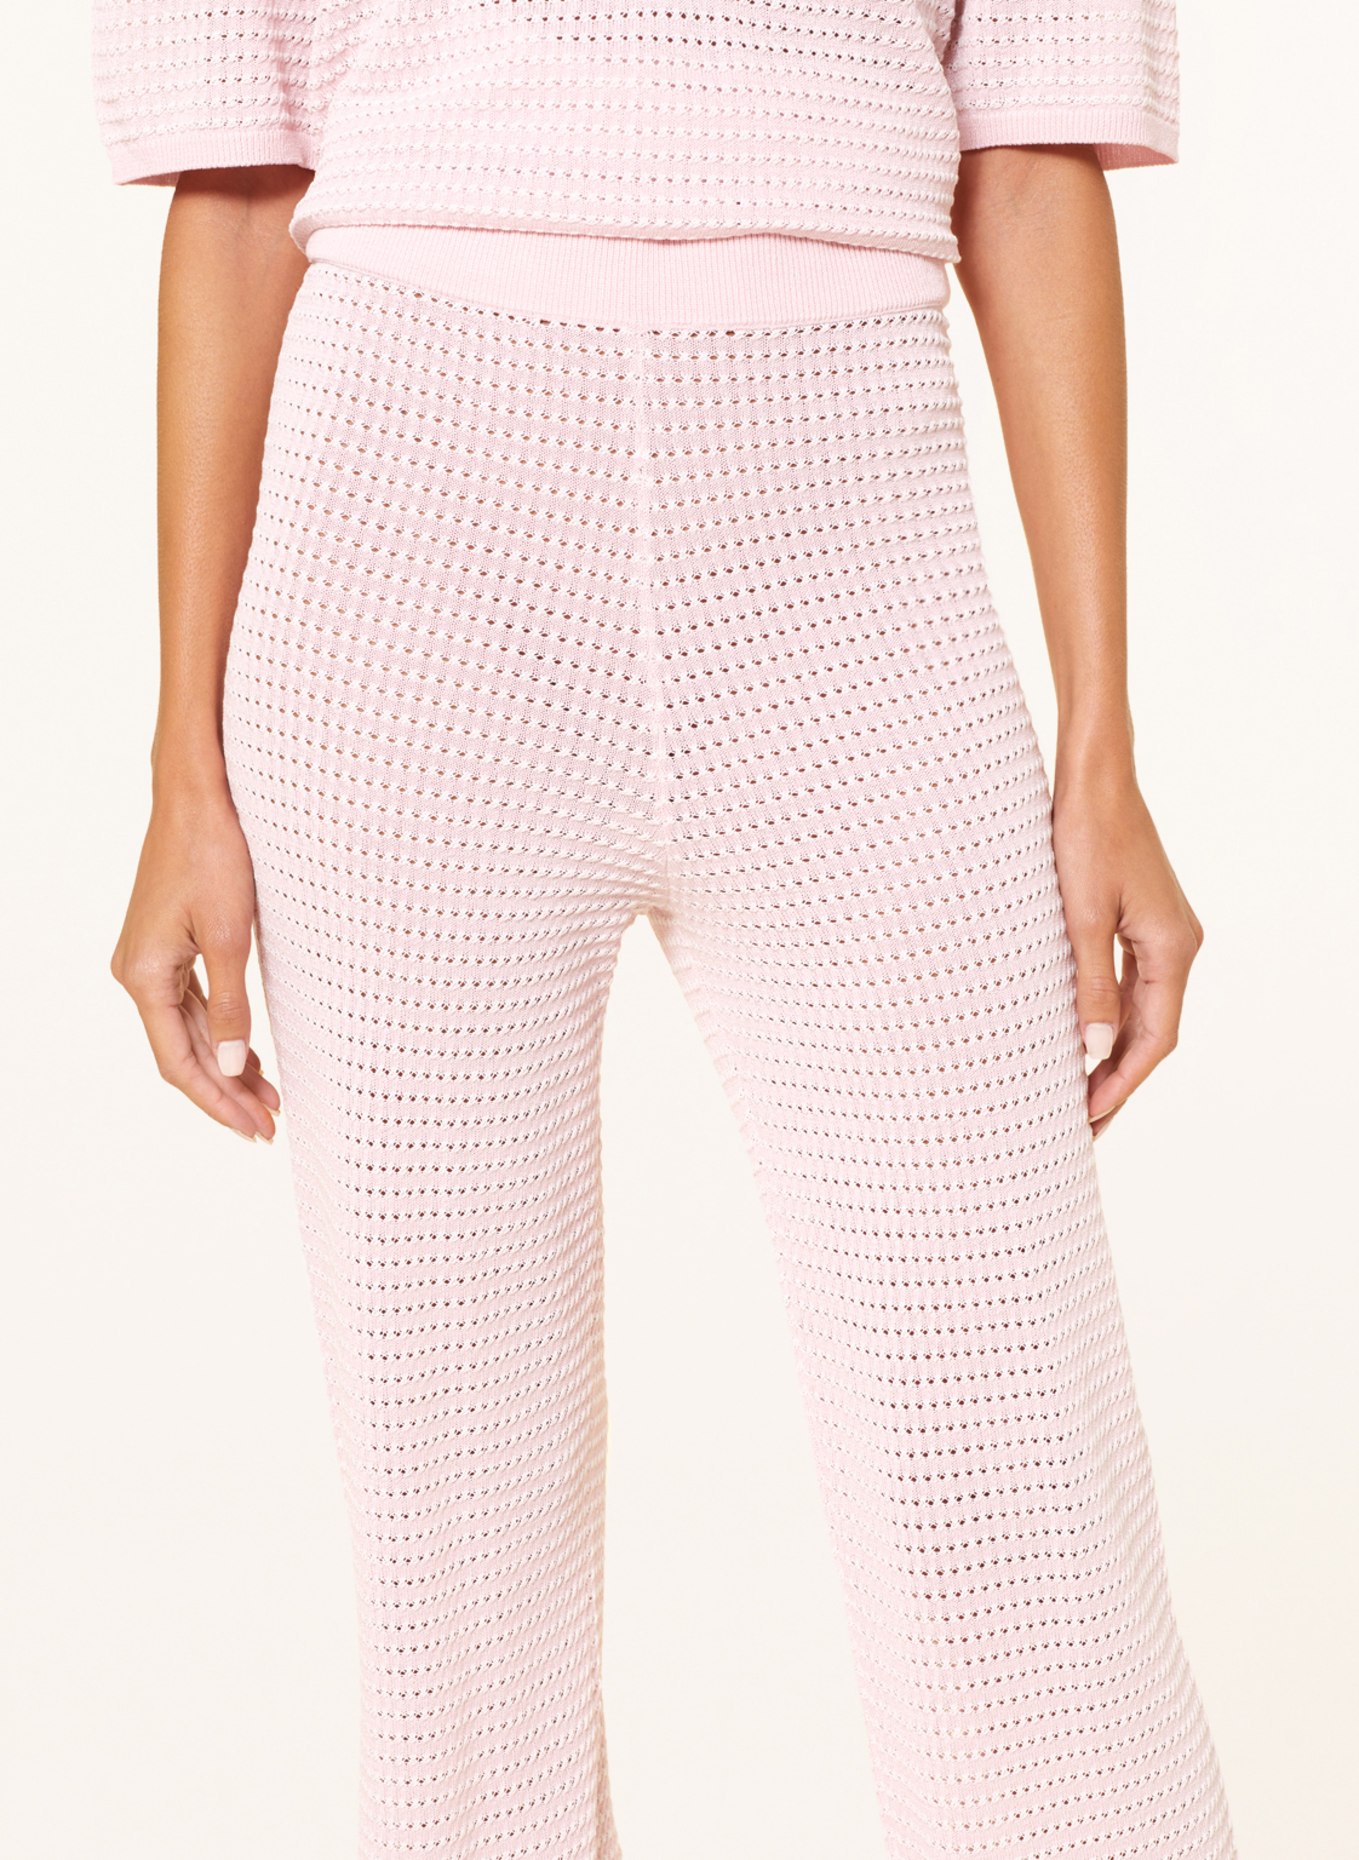 REMAIN Knit trousers, Color: LIGHT PINK/ WHITE (Image 5)